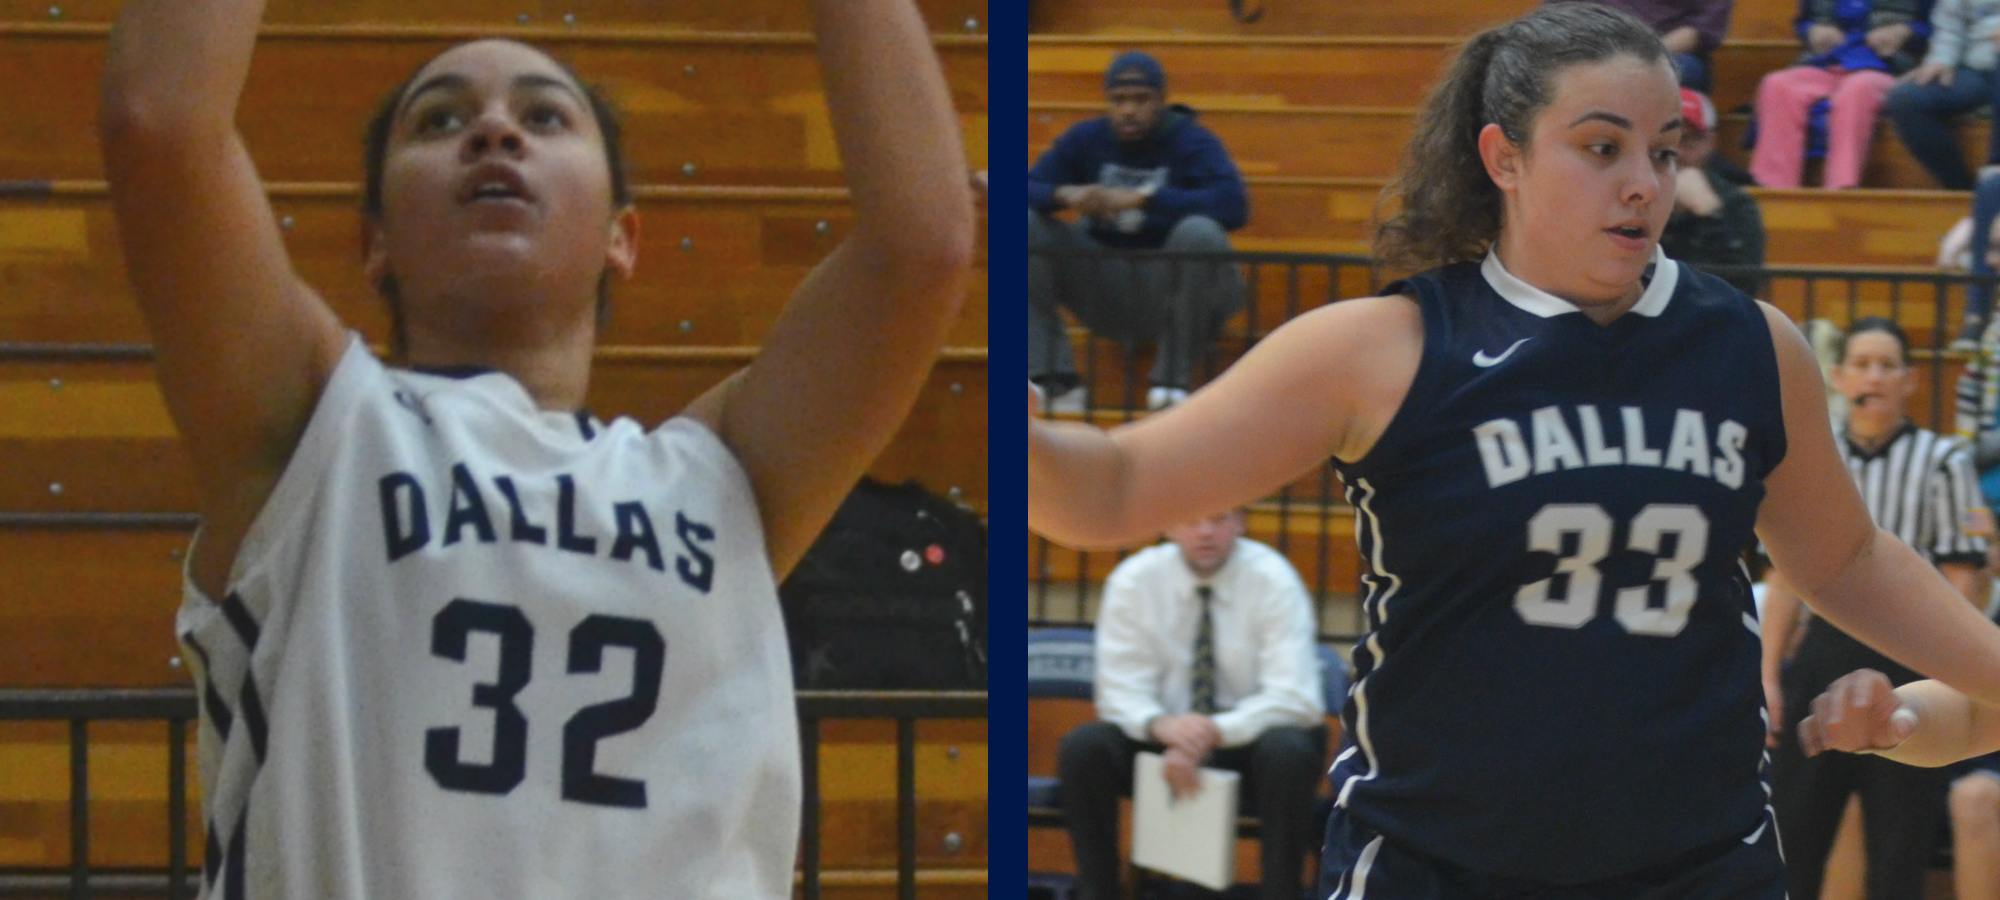 Top two scorers and rebounders for Crusaders garner All-Conference Awards.